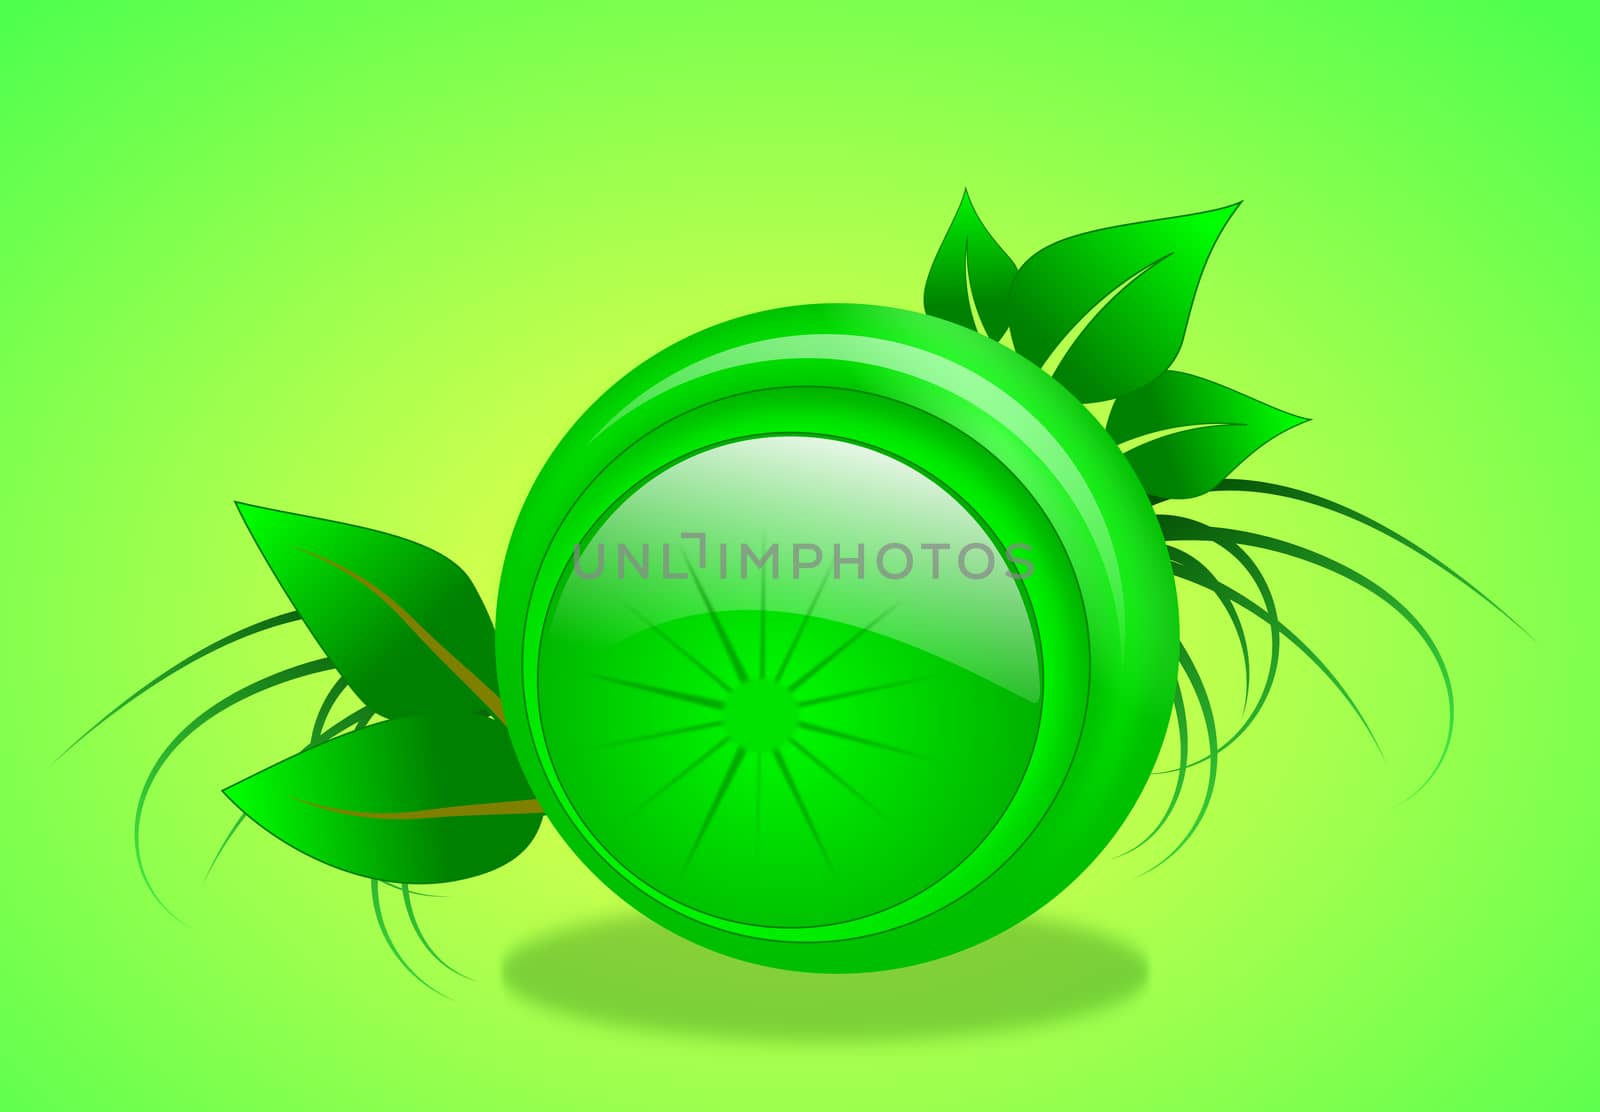 A green sphere enclosed in a protective casing and surrounded by green foliage with blank space for text message
